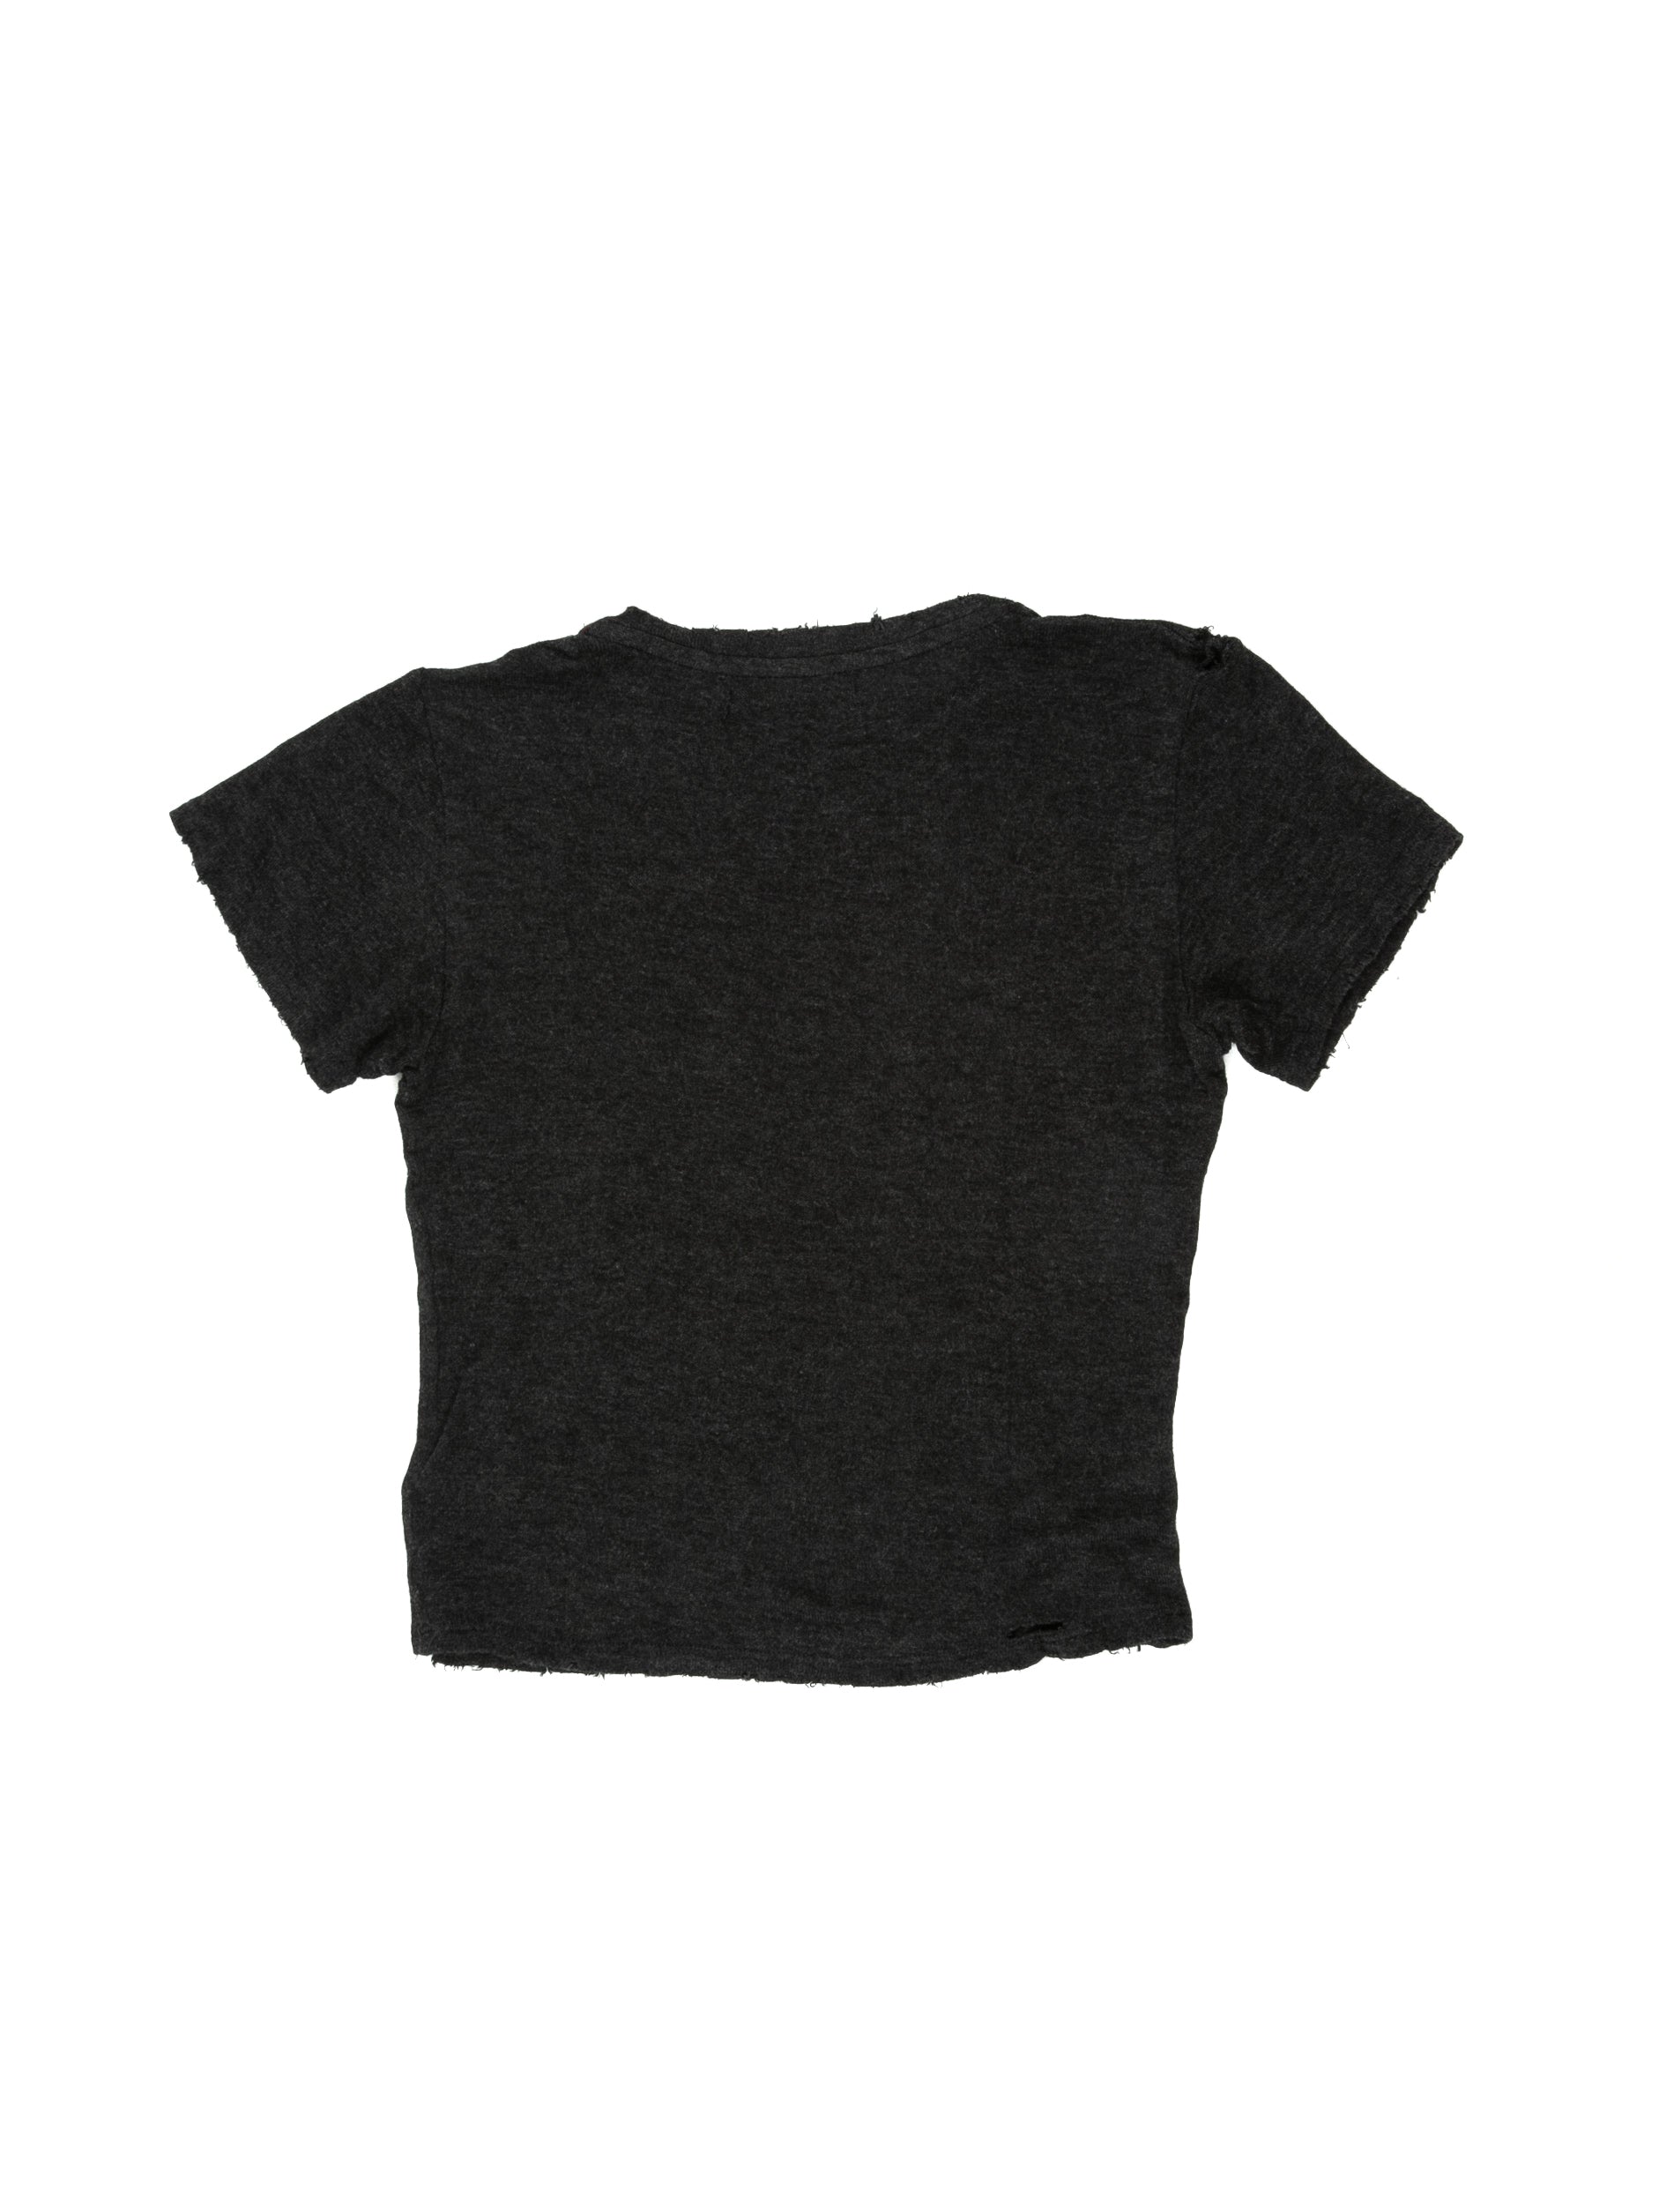 Back of Boxy Tee in Charcoal